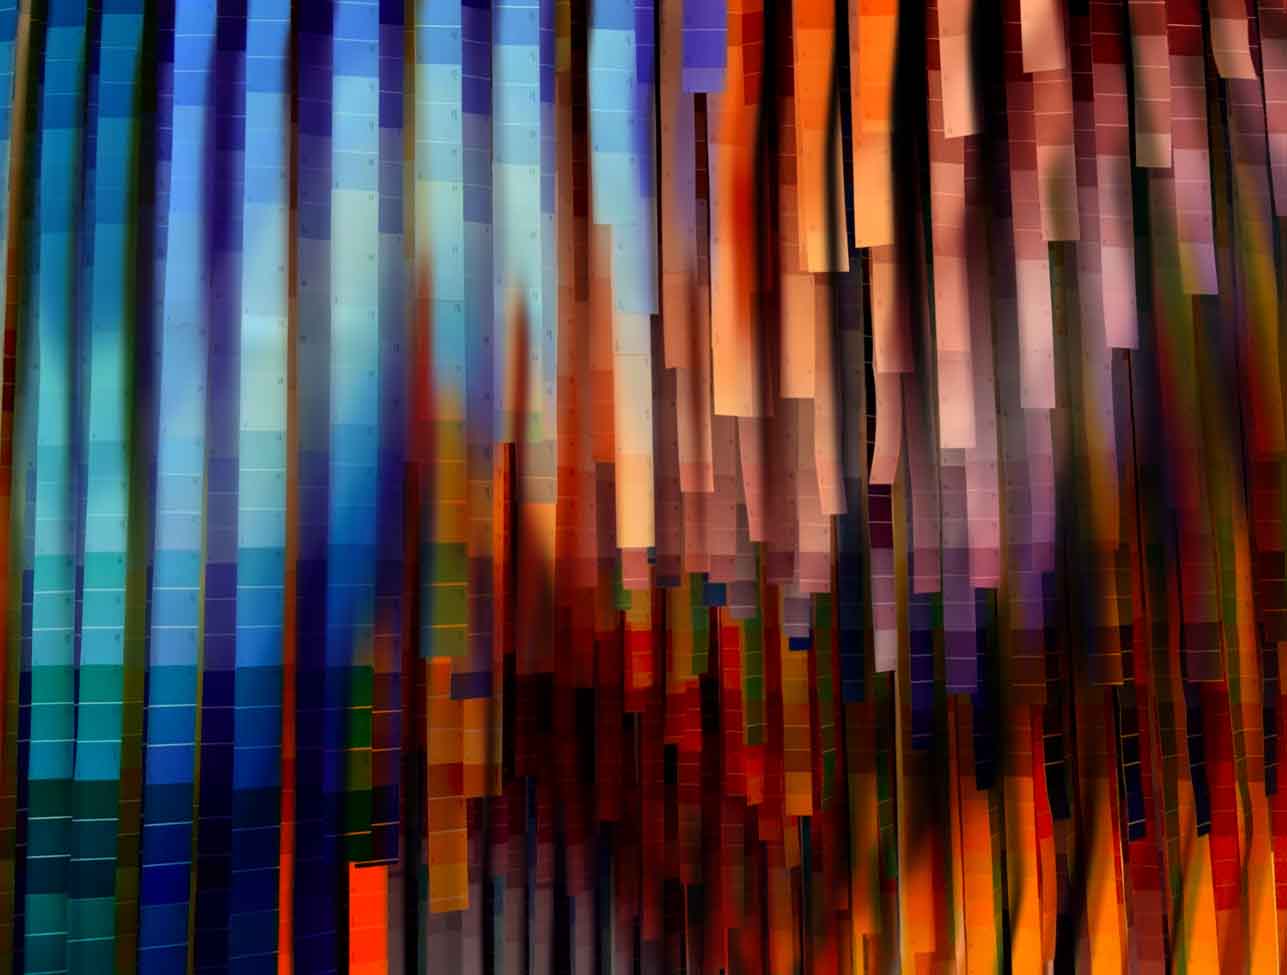 Abstract image of multiple colors